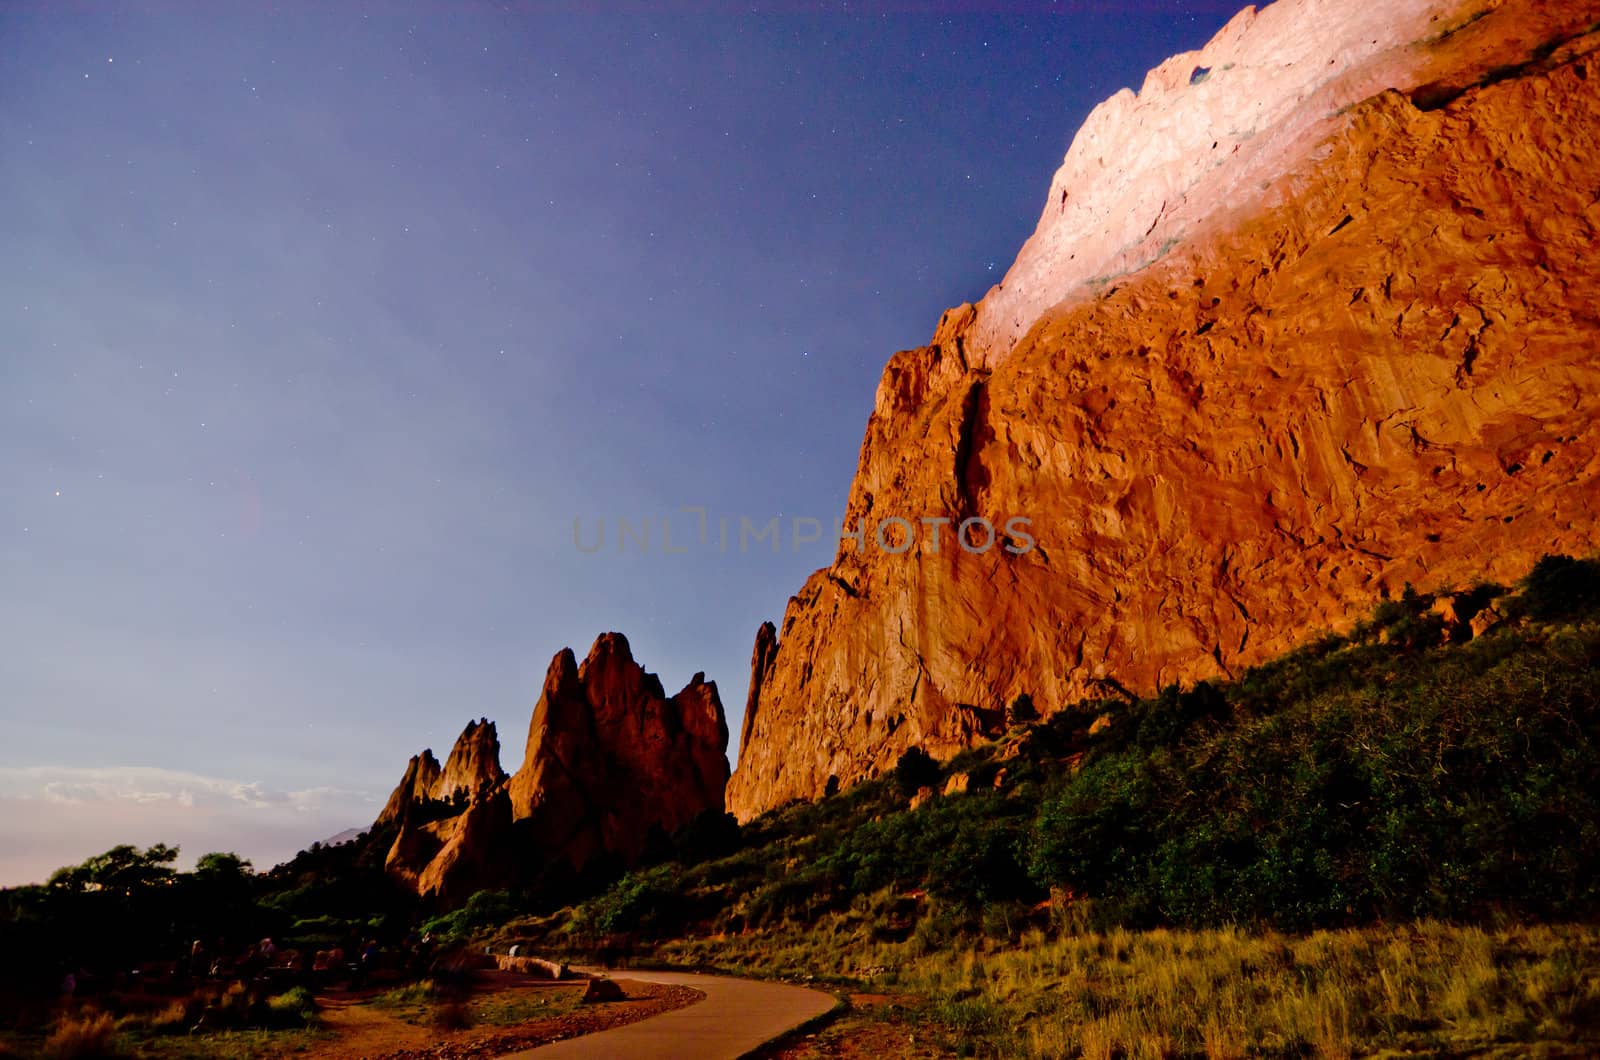 Nighttime Shot of the Rock Formations at Garden of the Gods in Colorado Springs, Colorado